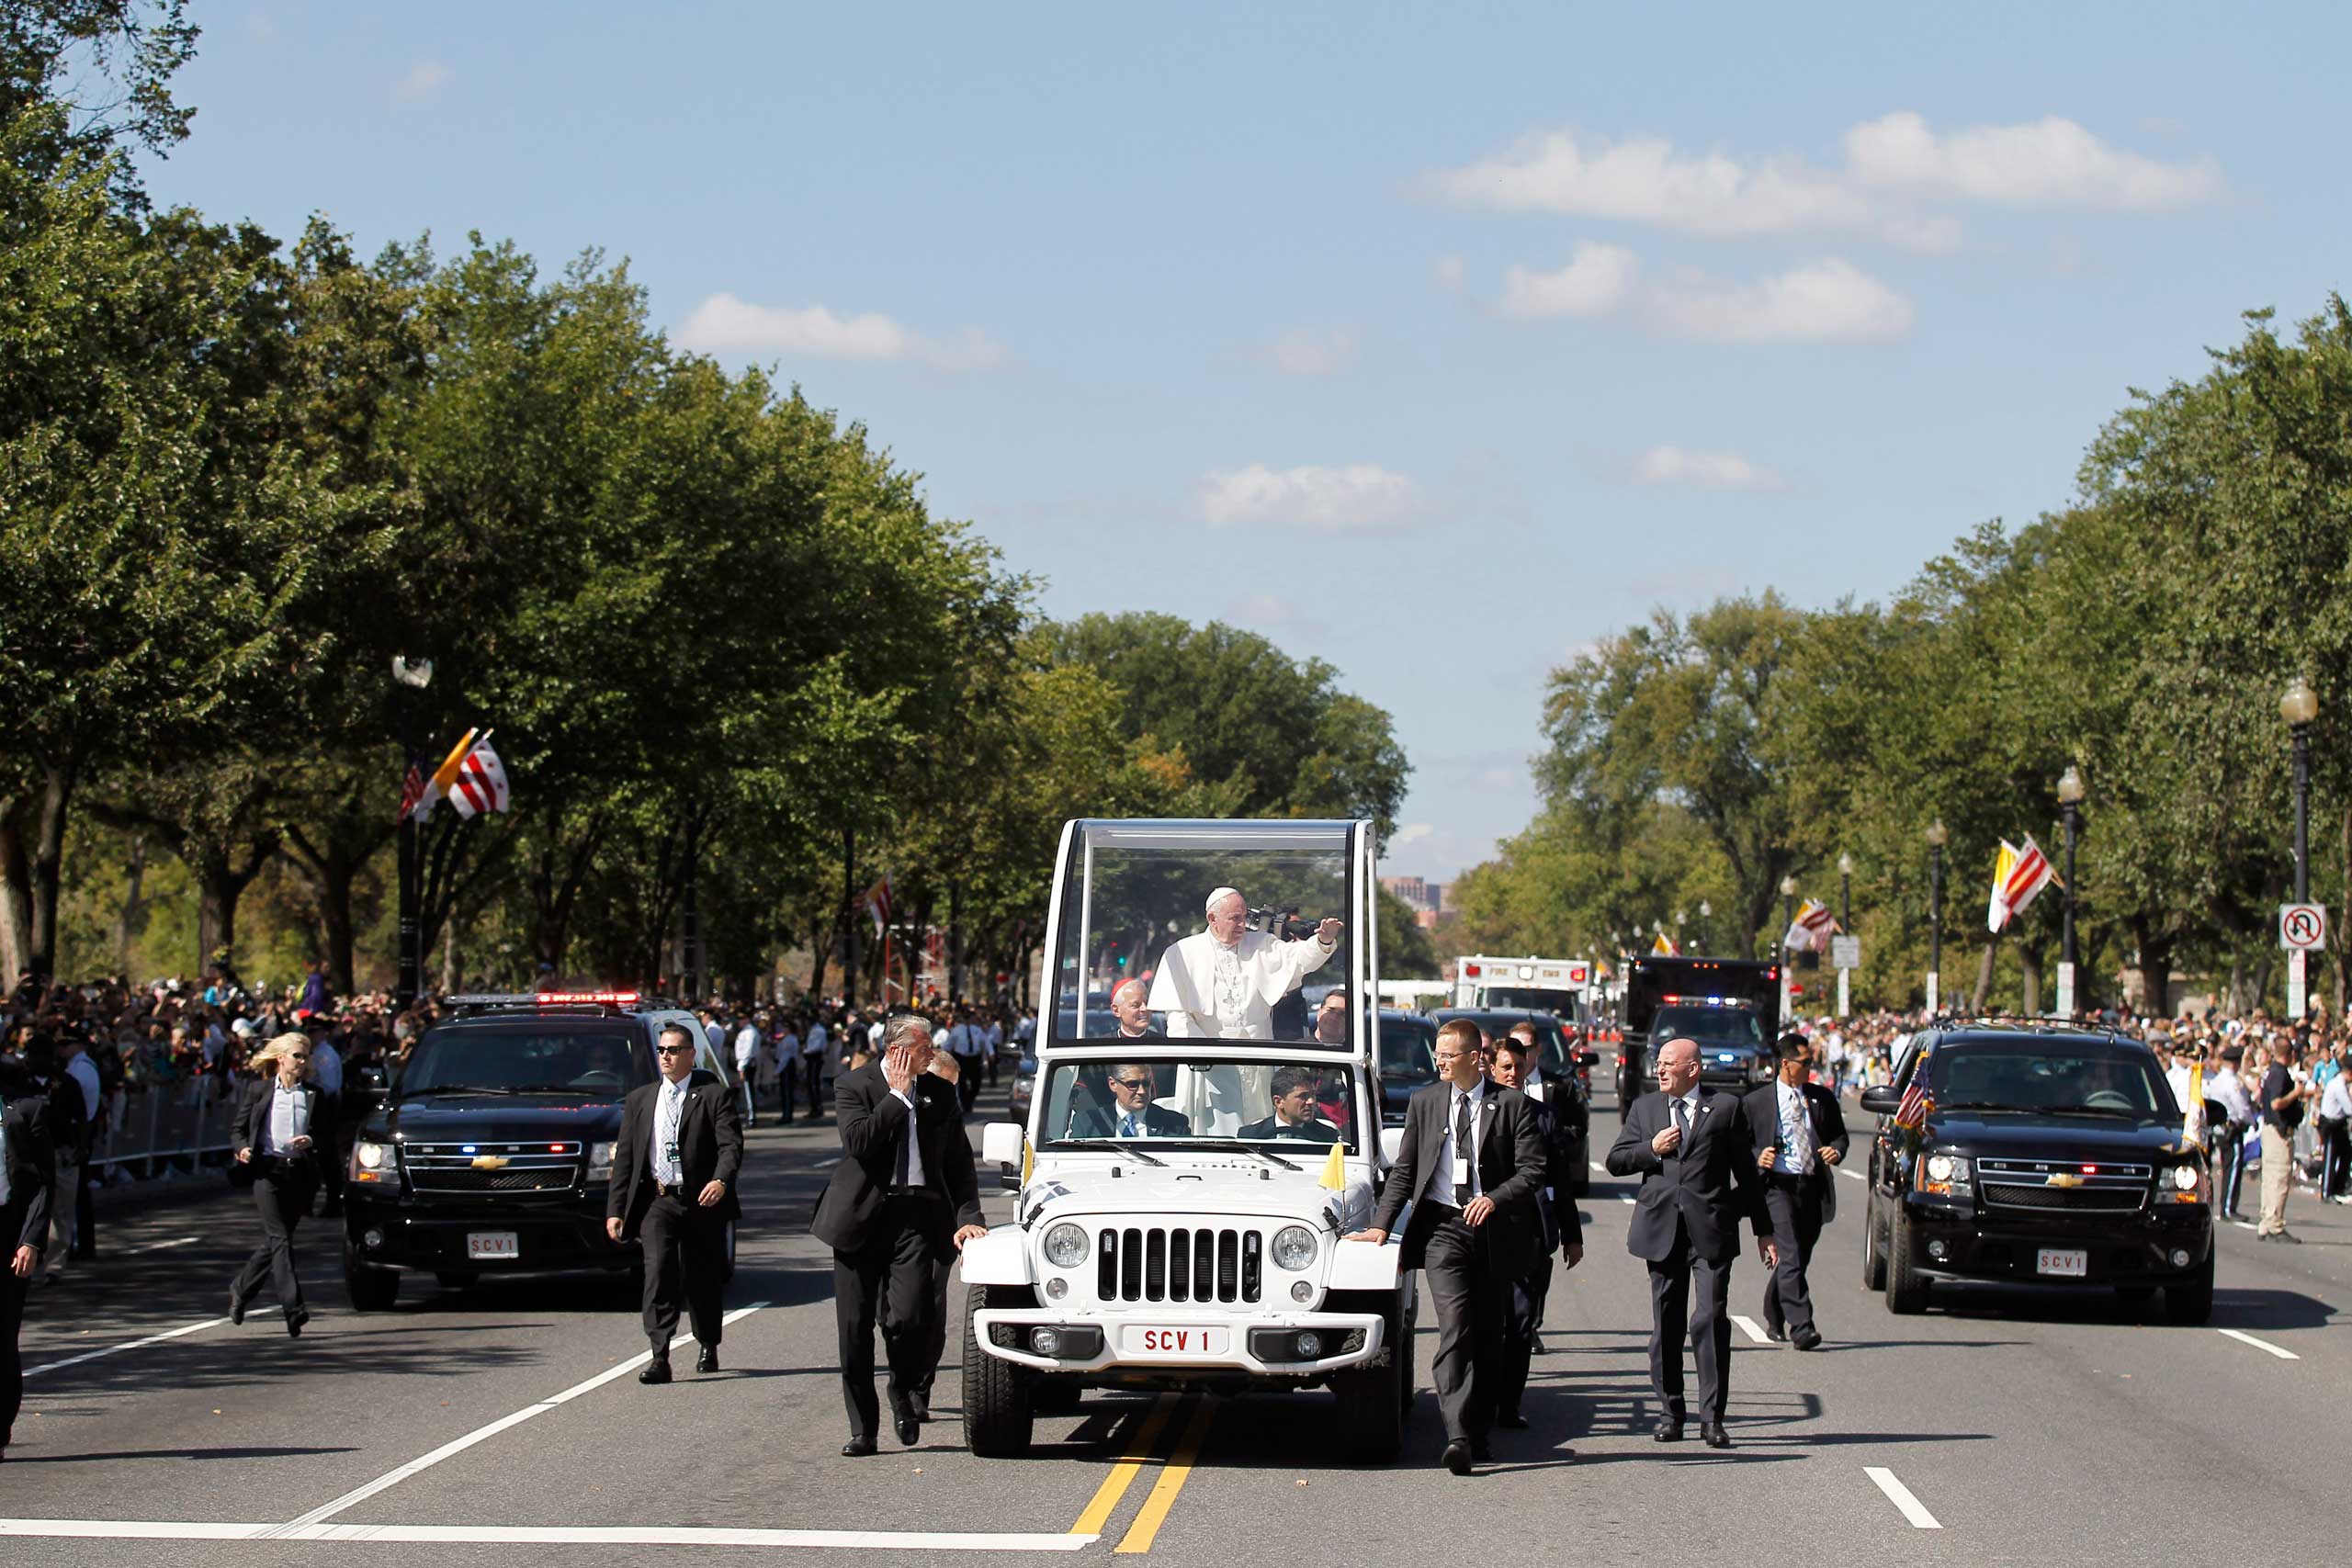 Pope Francis waves to the crowd from the popemobile during a parade along Constitution Avenue in Washington, on Sept. 23, 2015.